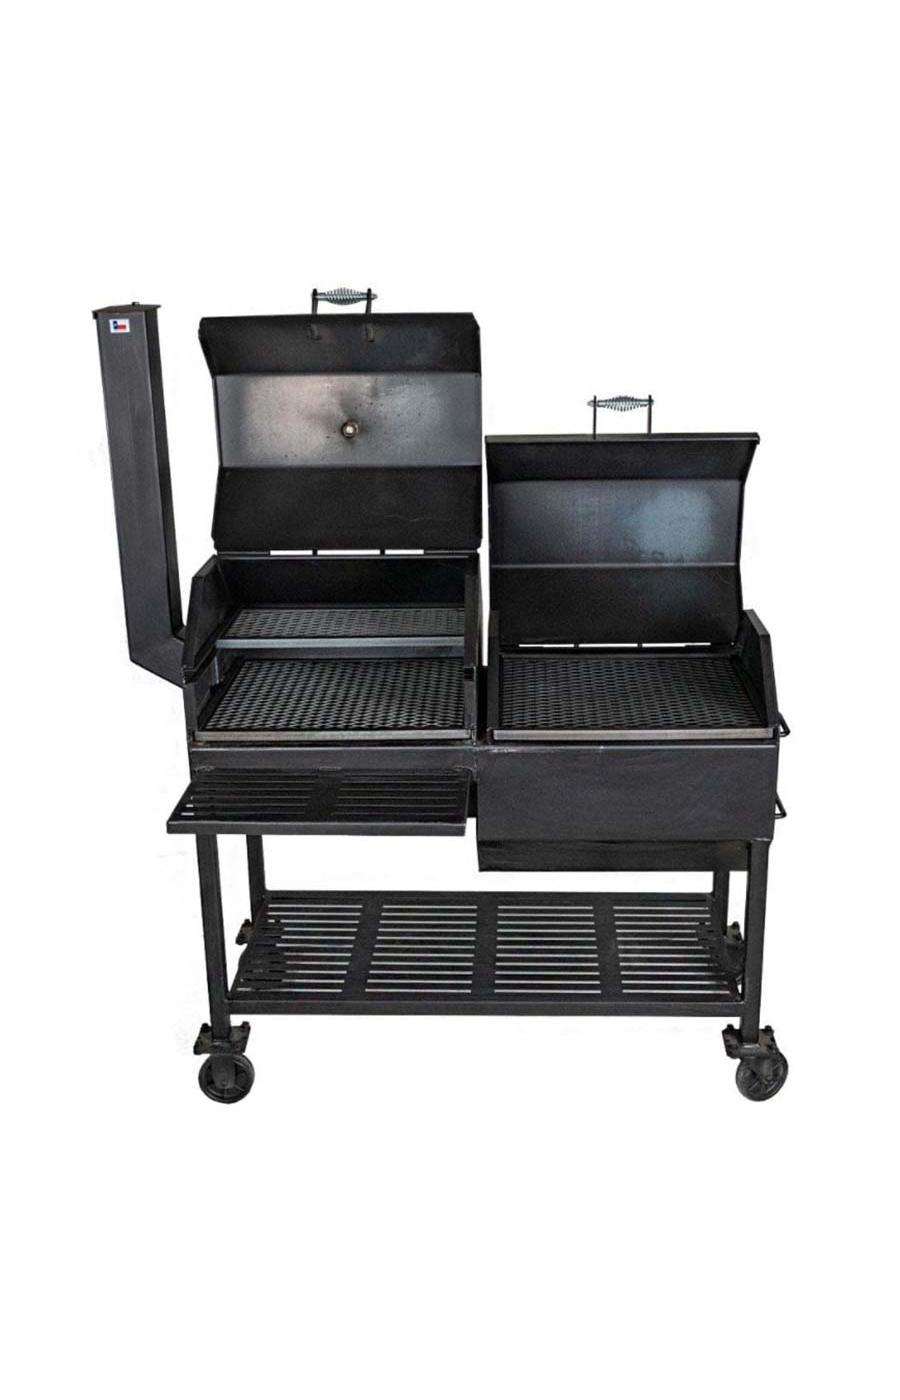 All Seasons Feeders 24" x 20" Charcoal BBQ Pit with Firebox; image 6 of 7